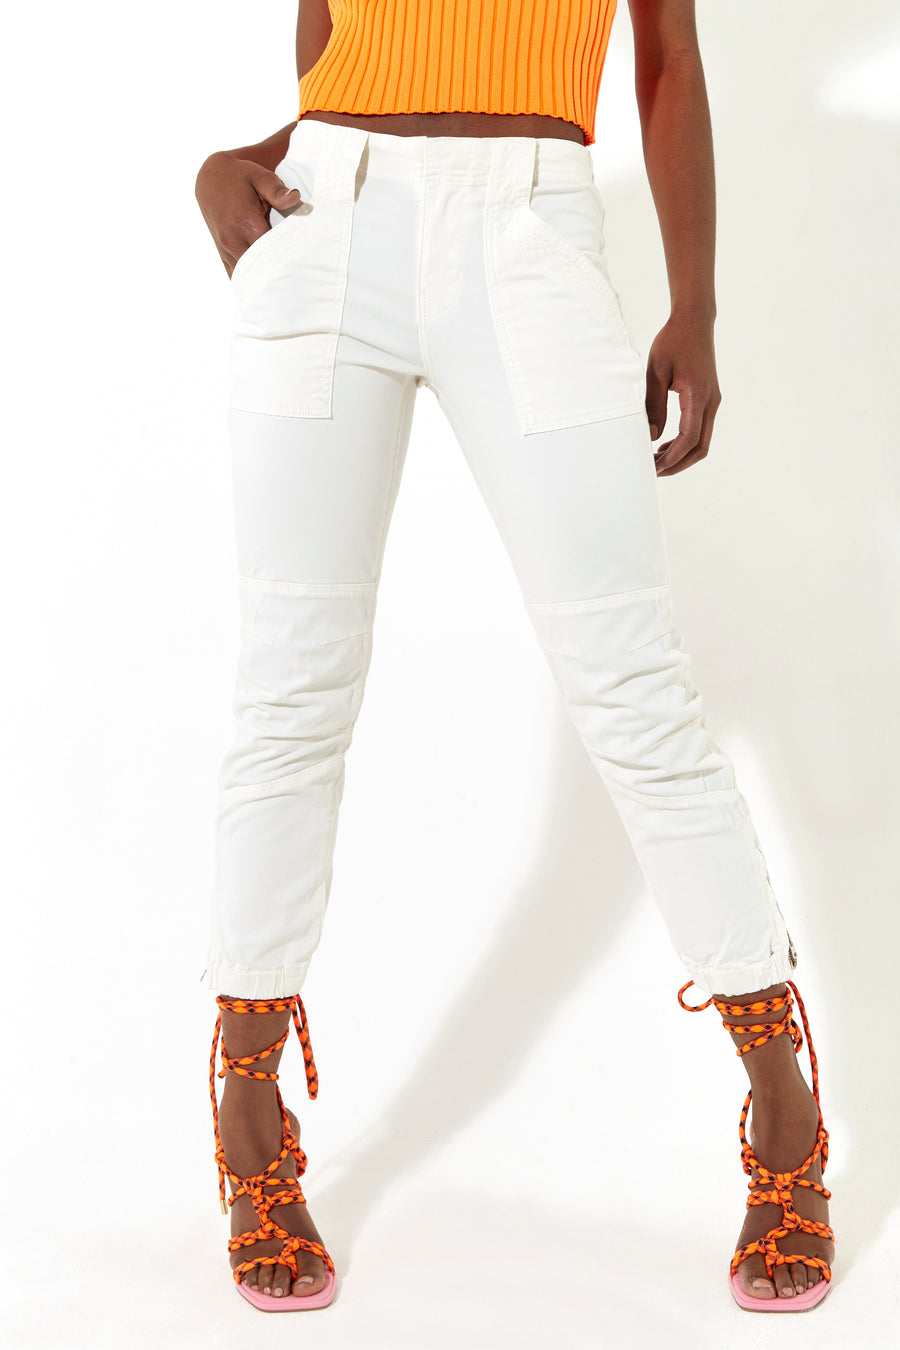 House of Holland Off White Skinny Cropped Trousers With a Pocket Detail and Metal Zip Detail